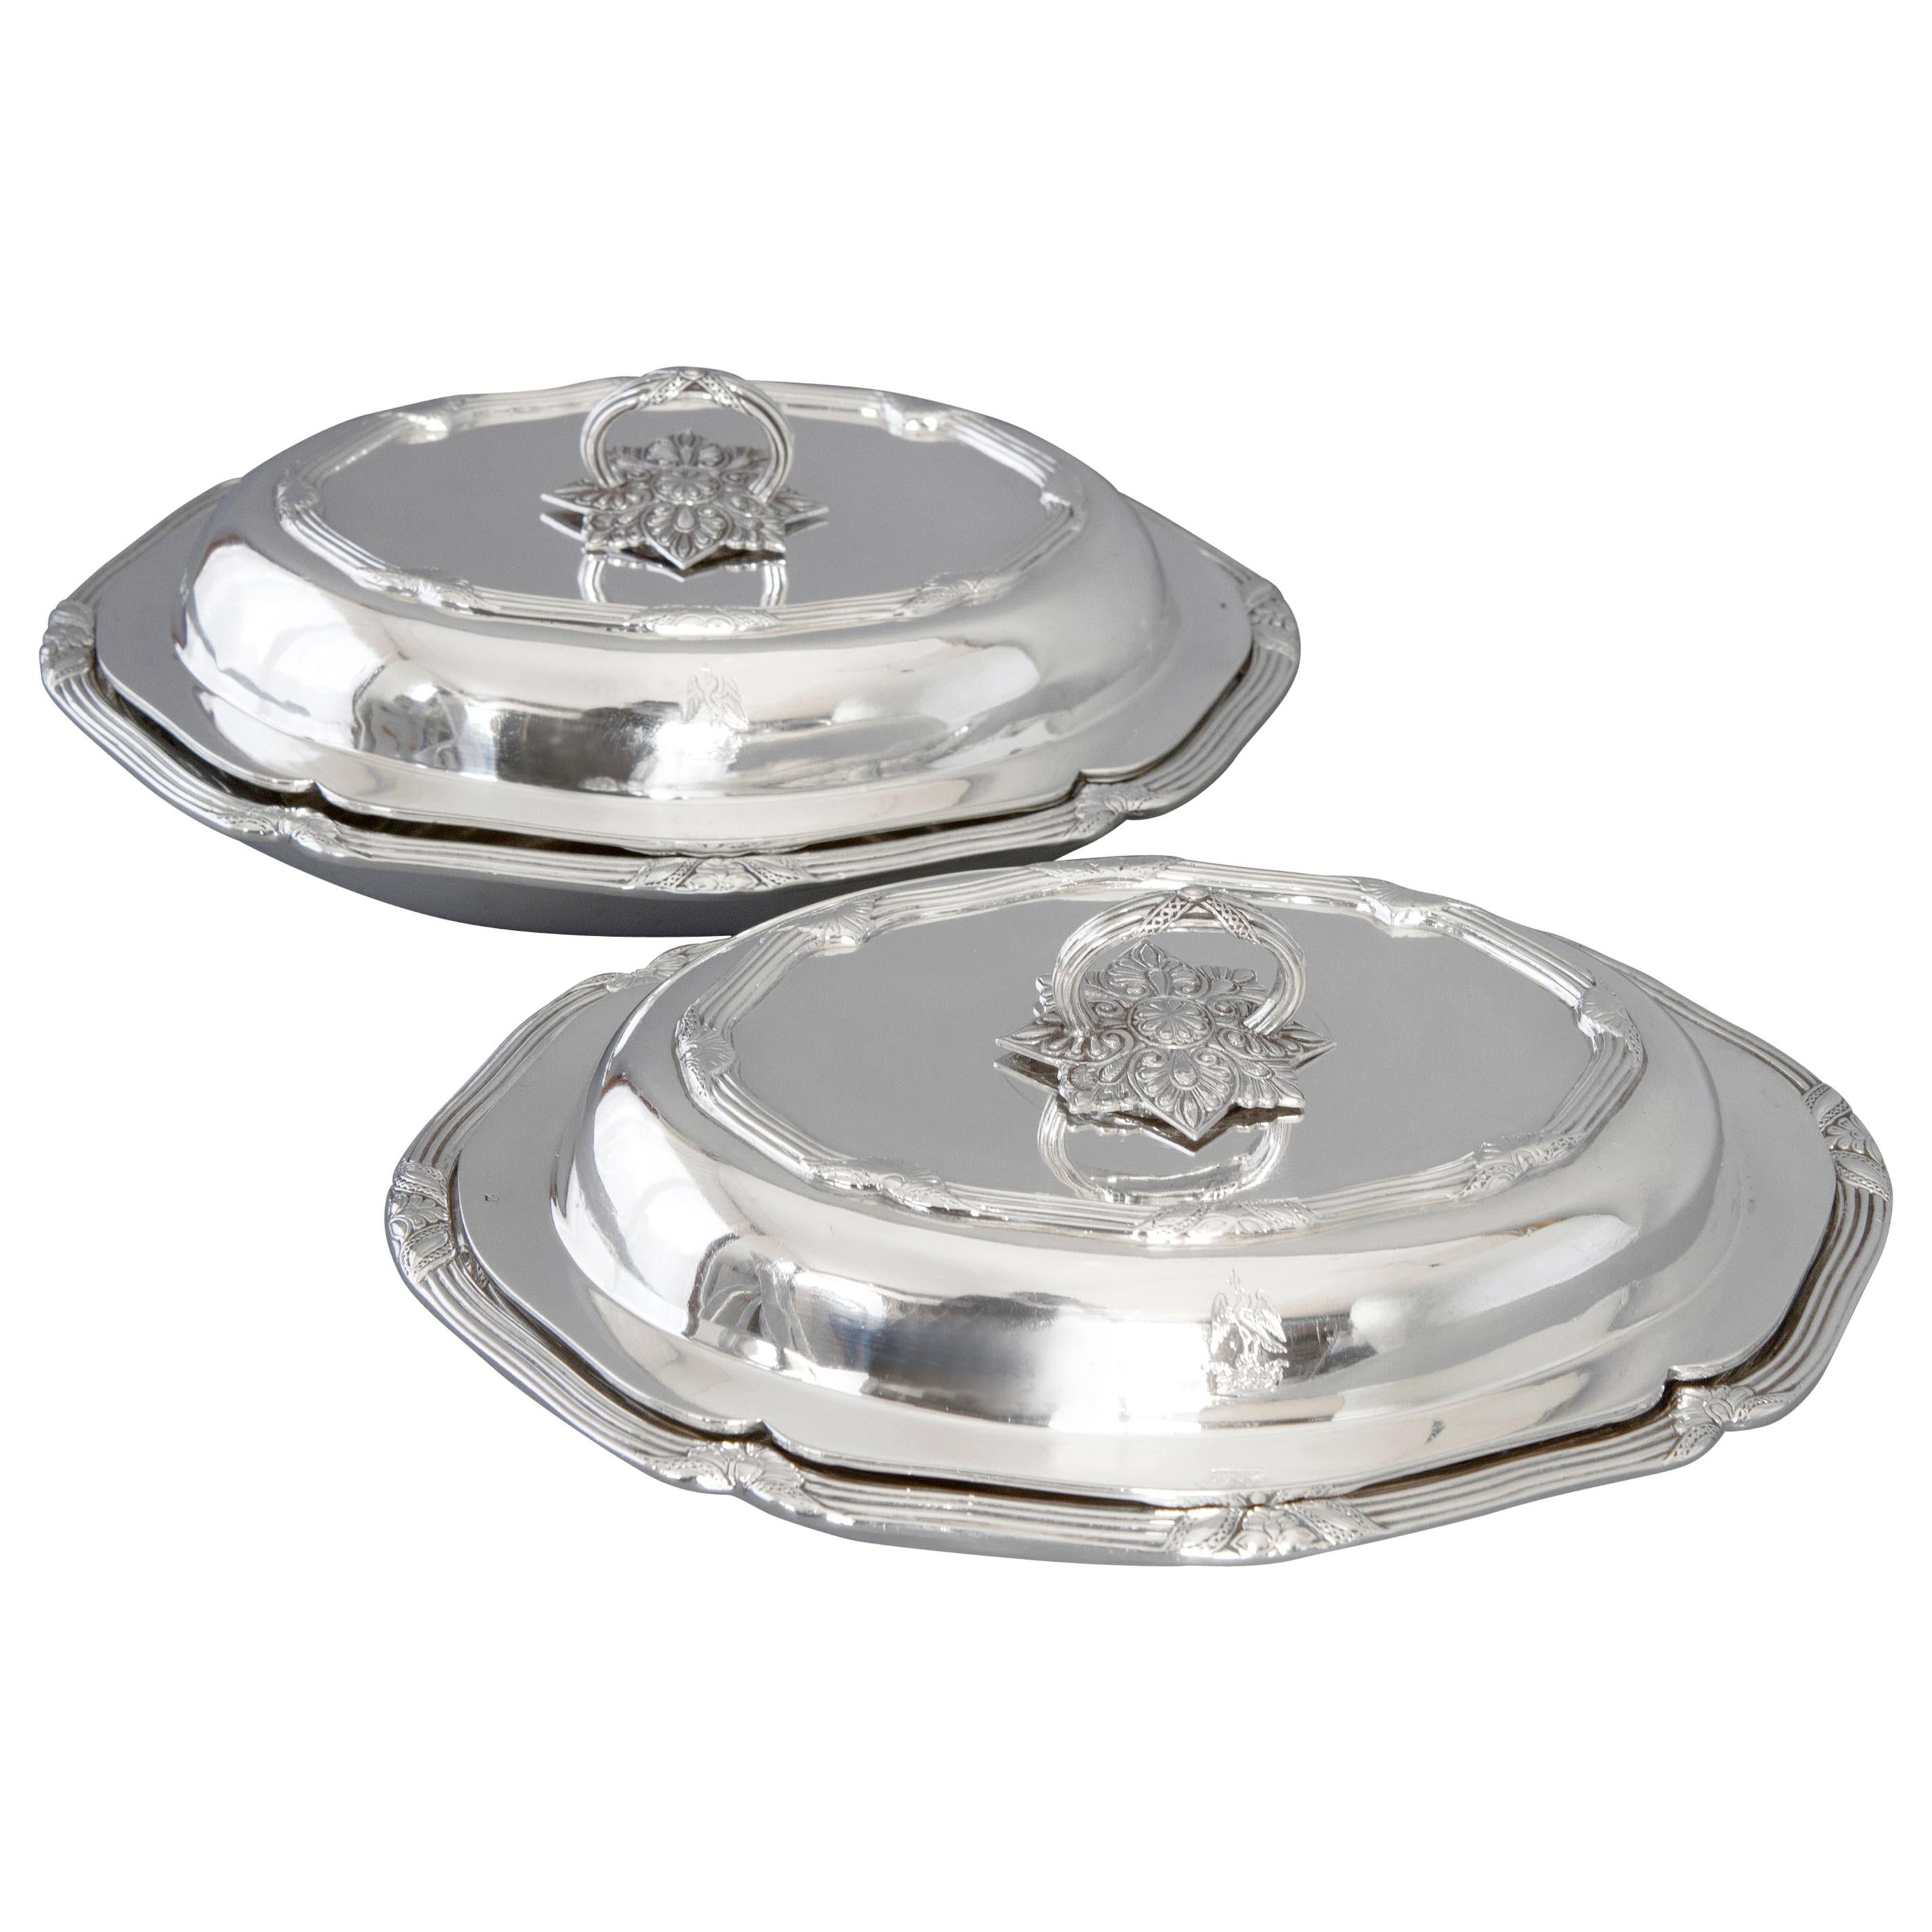 Pair of Victorian Silver Entree Dishes, London, 1896